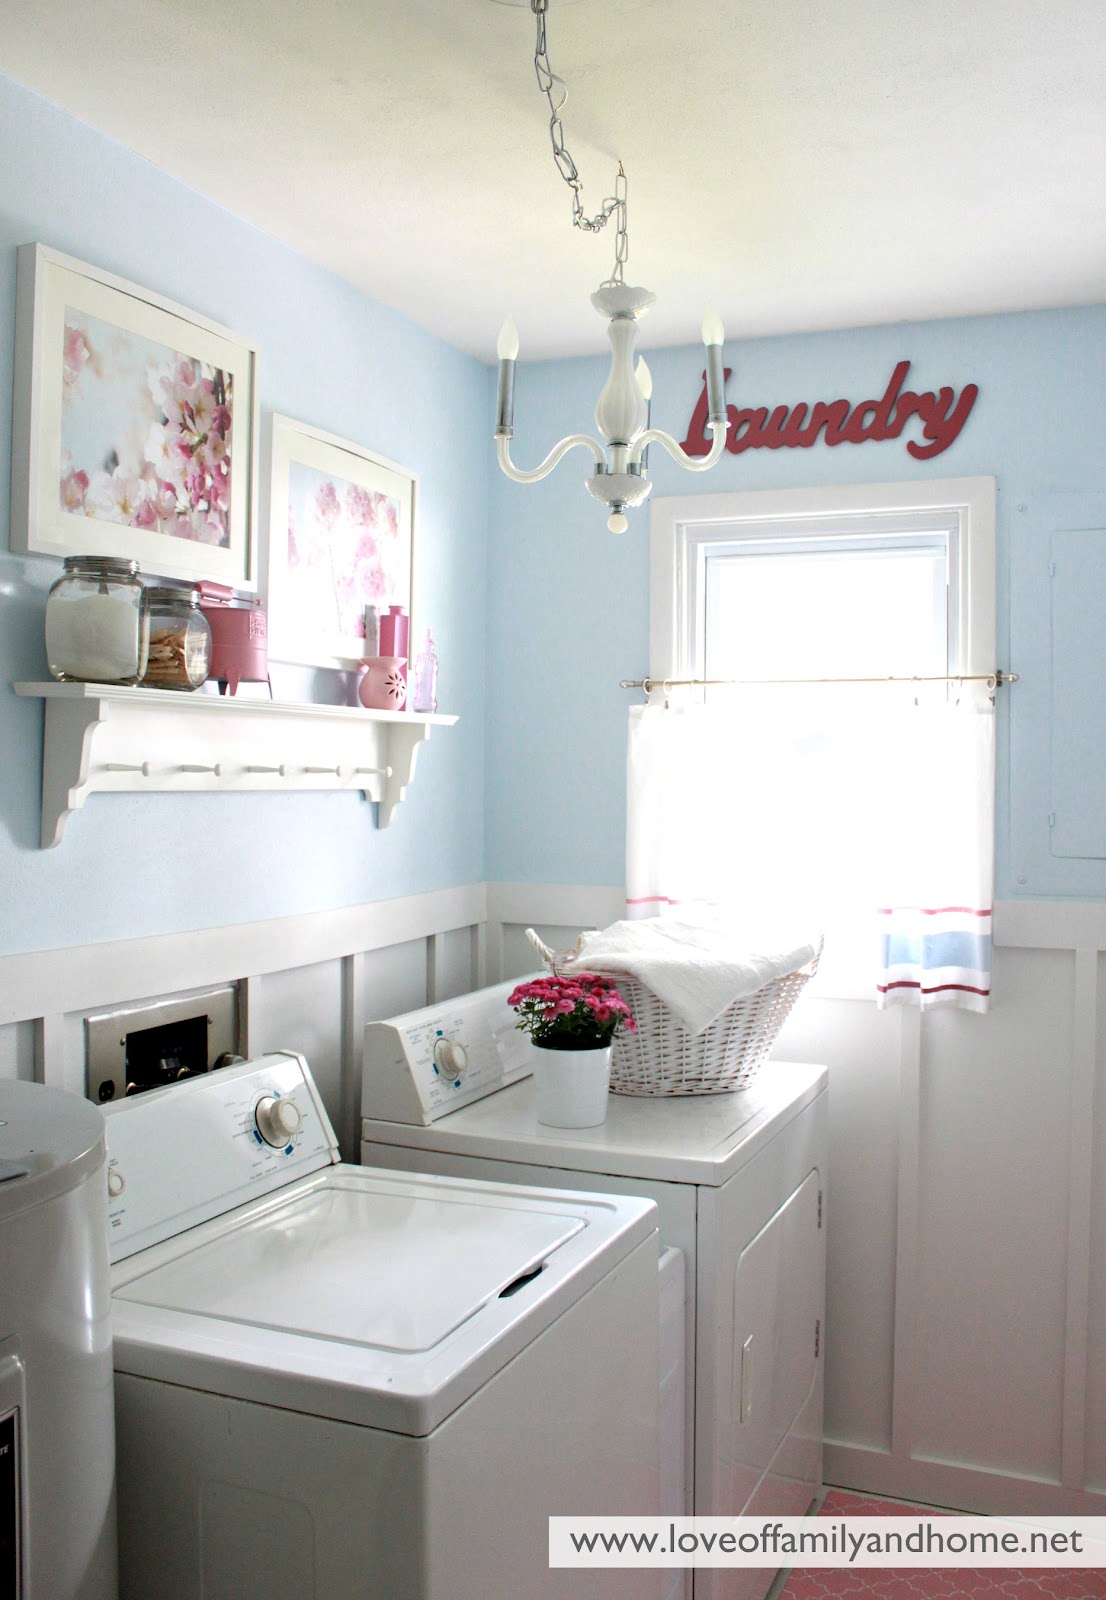 Easy DIY laundry shelf over washer and dryer, Thrifty Decor Chick